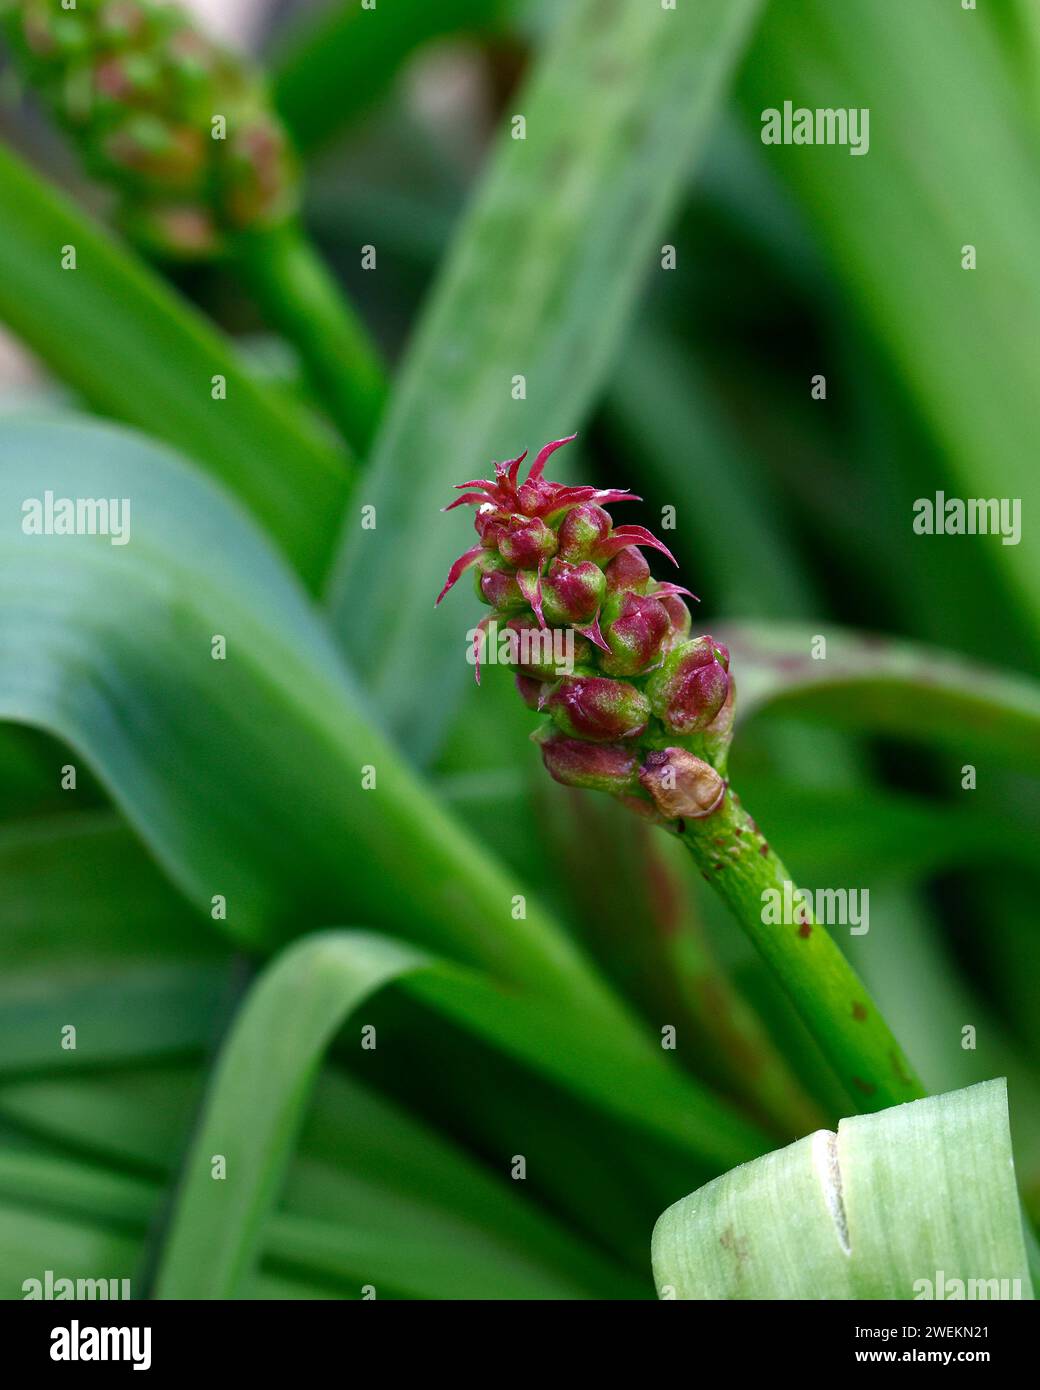 Close up of the red flower bud of the tender flowering garden plant lachenalia quadricolor. Stock Photo